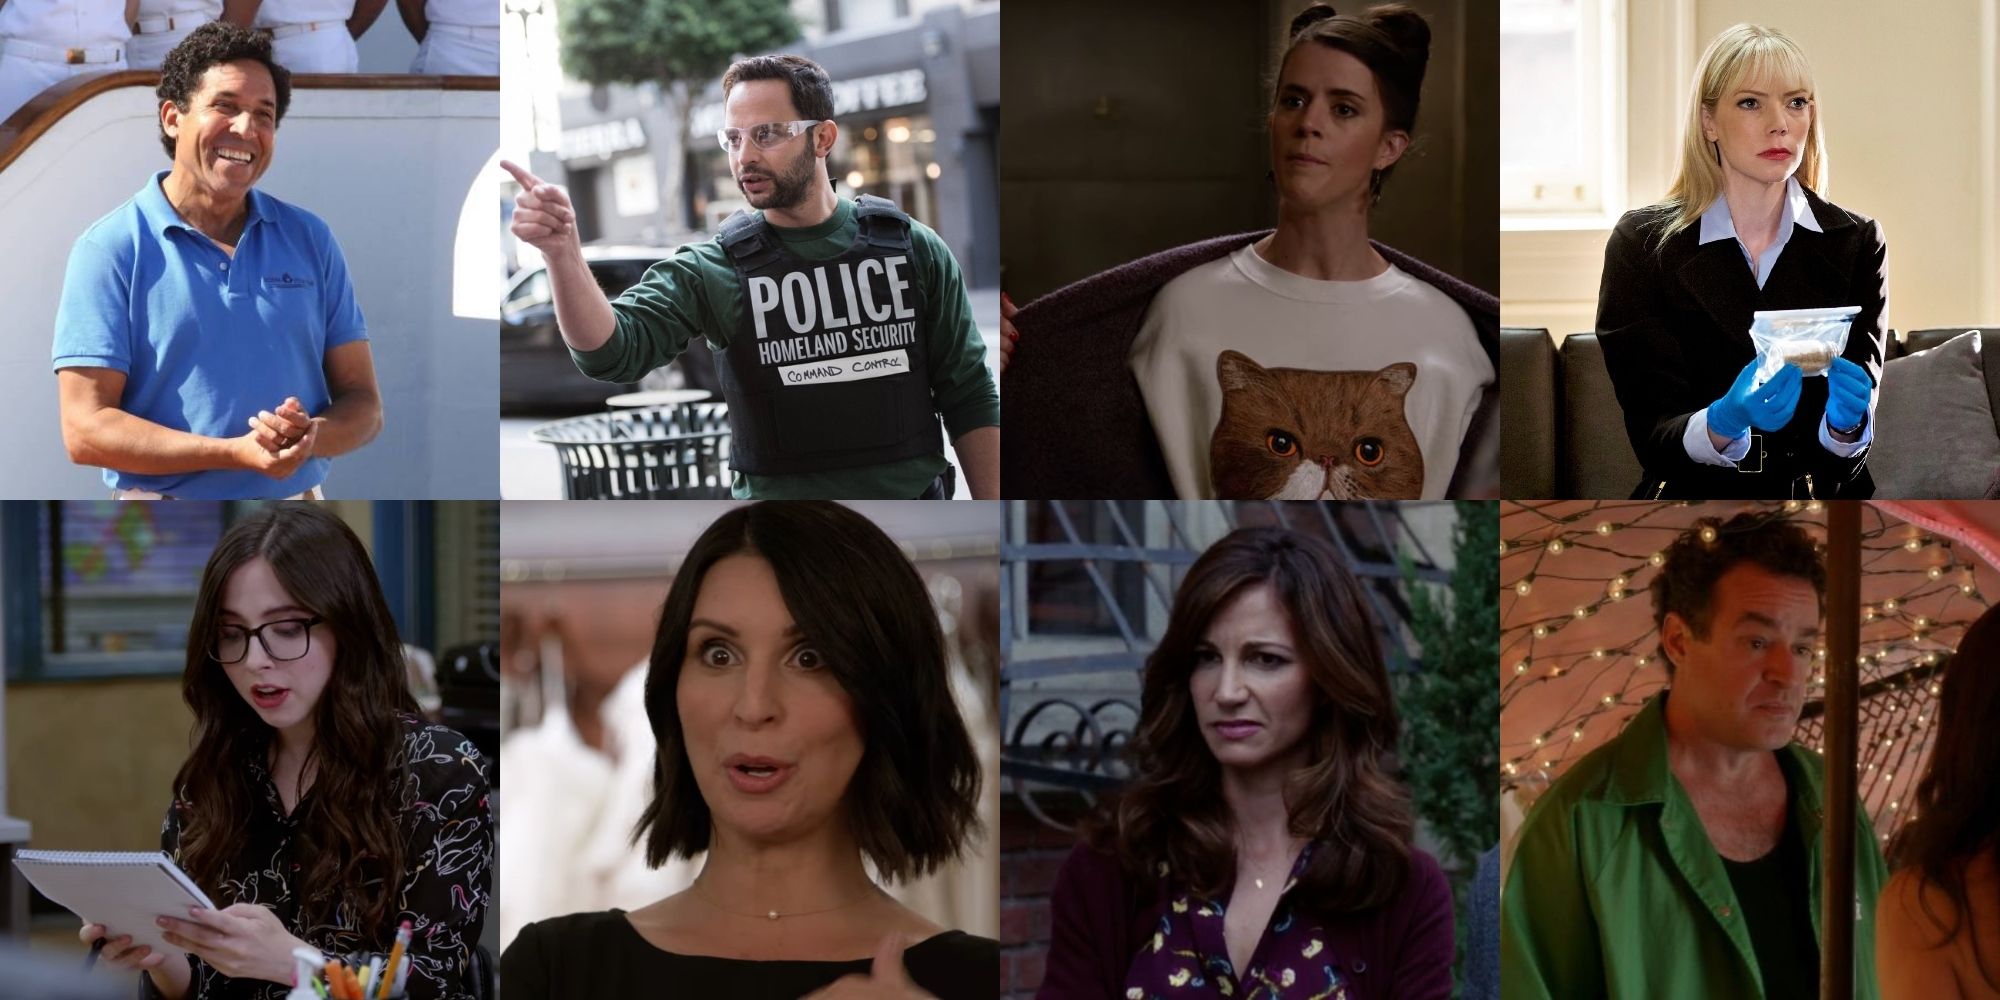 Eight other actors that have minor roles in New Girl and Brooklyn 99